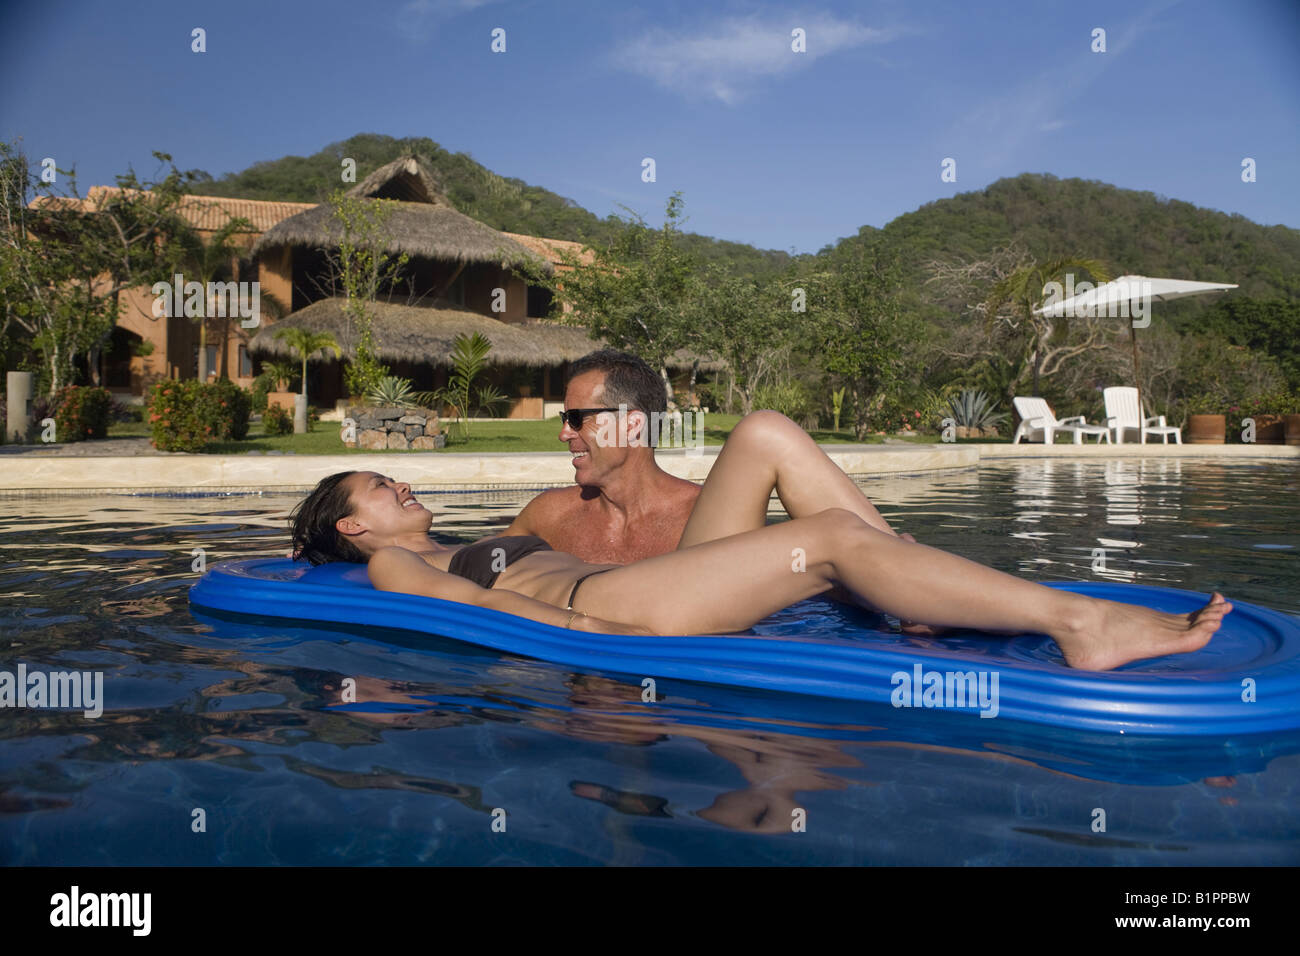 Romantic couple share a moment together in a luxurious seaside pool and villa. Stock Photo